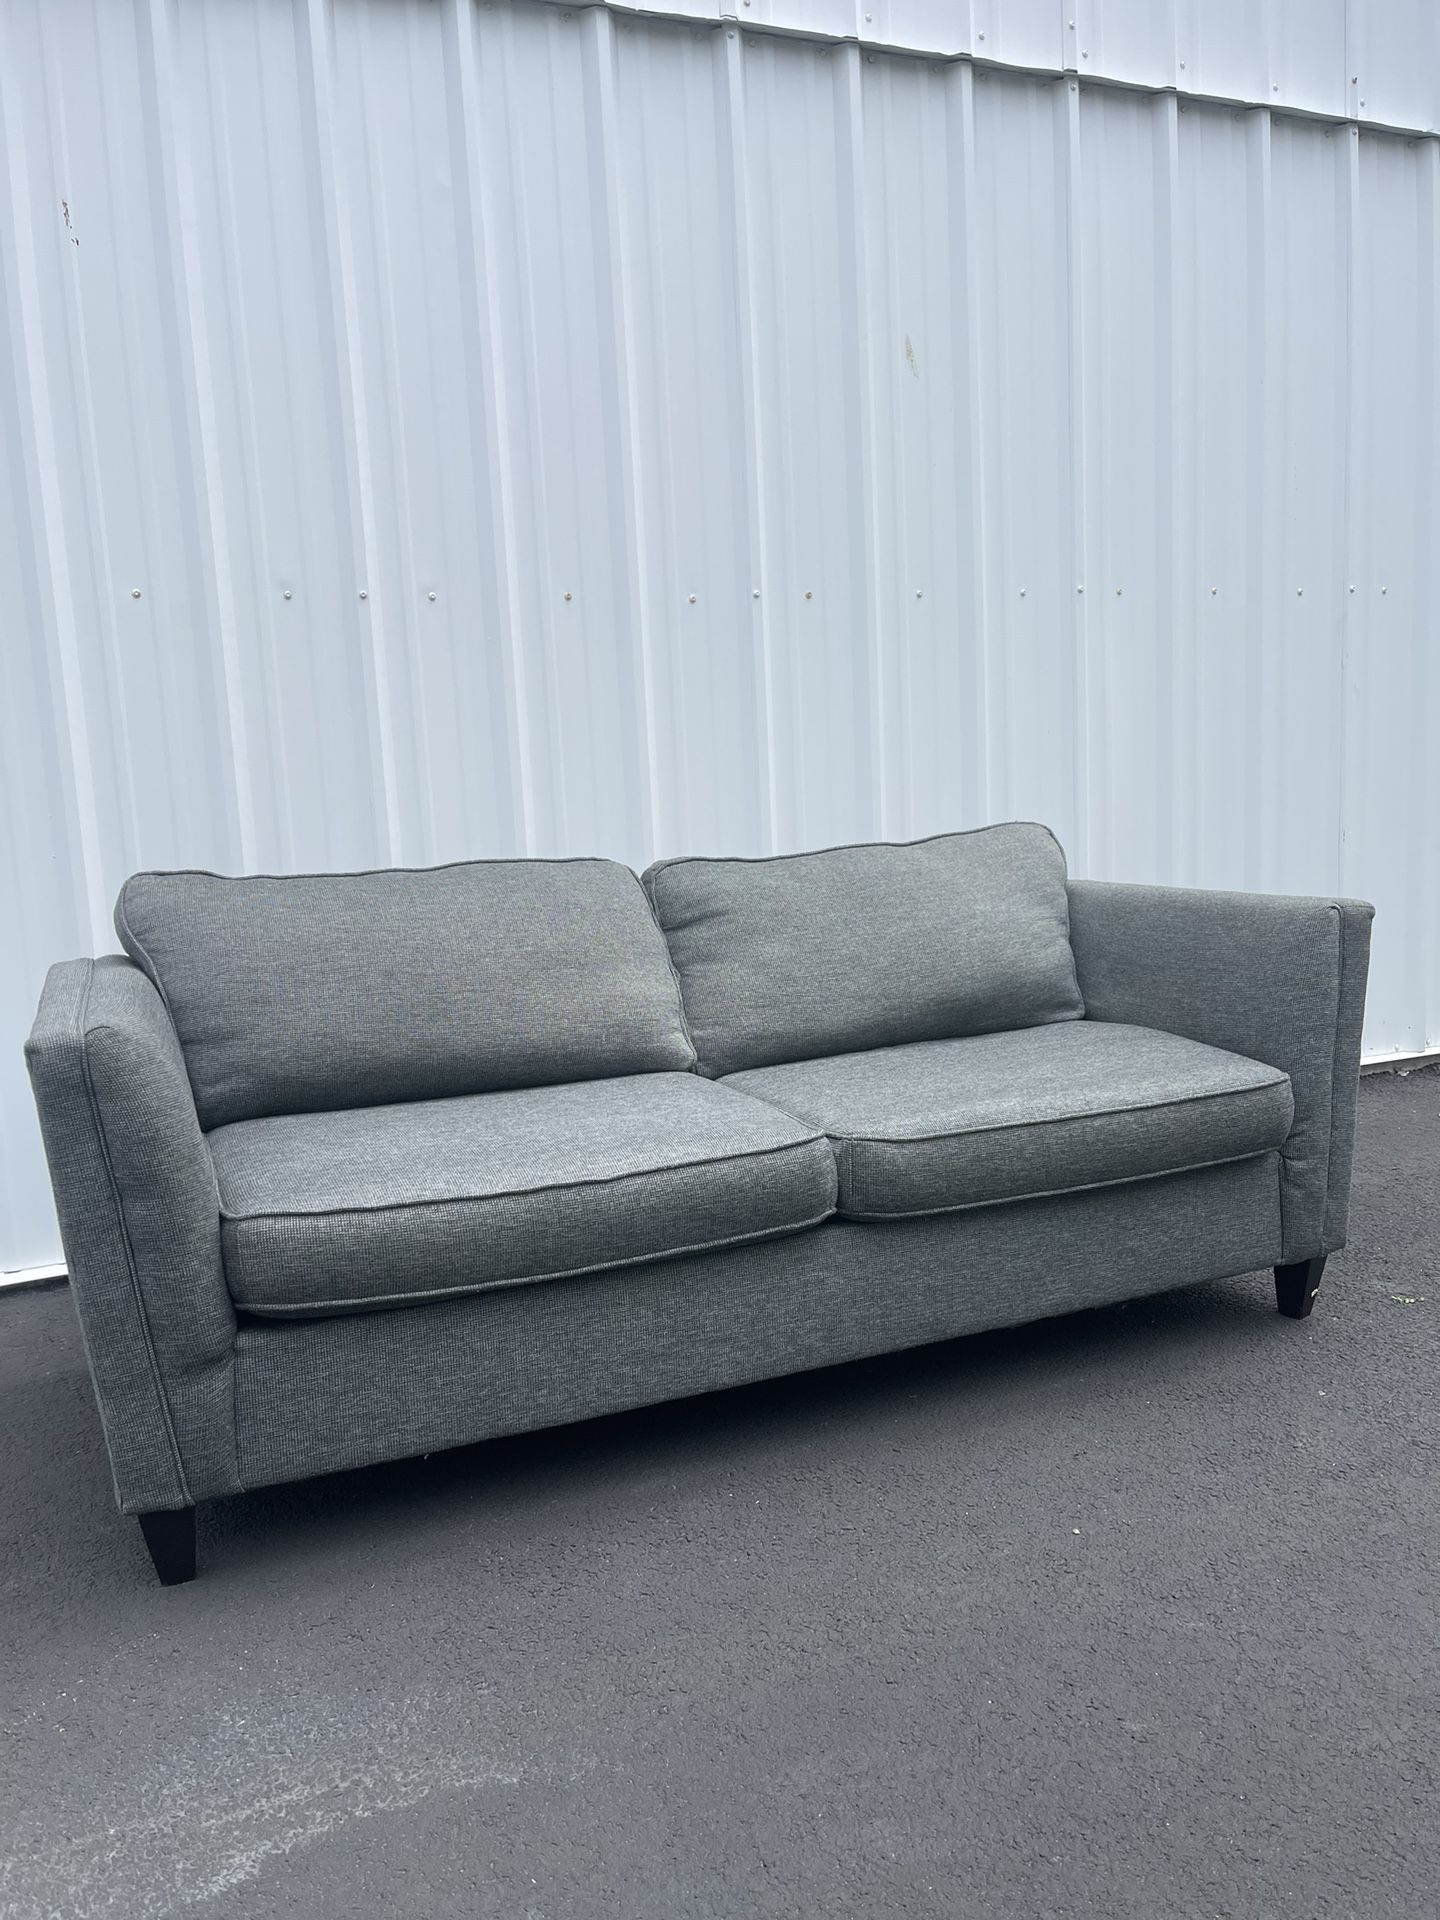 🚚 FREE DELIVERY 🚚 Raymour & Flanigan - Paley, Fabric Dark Grey 2 Seater Sofa